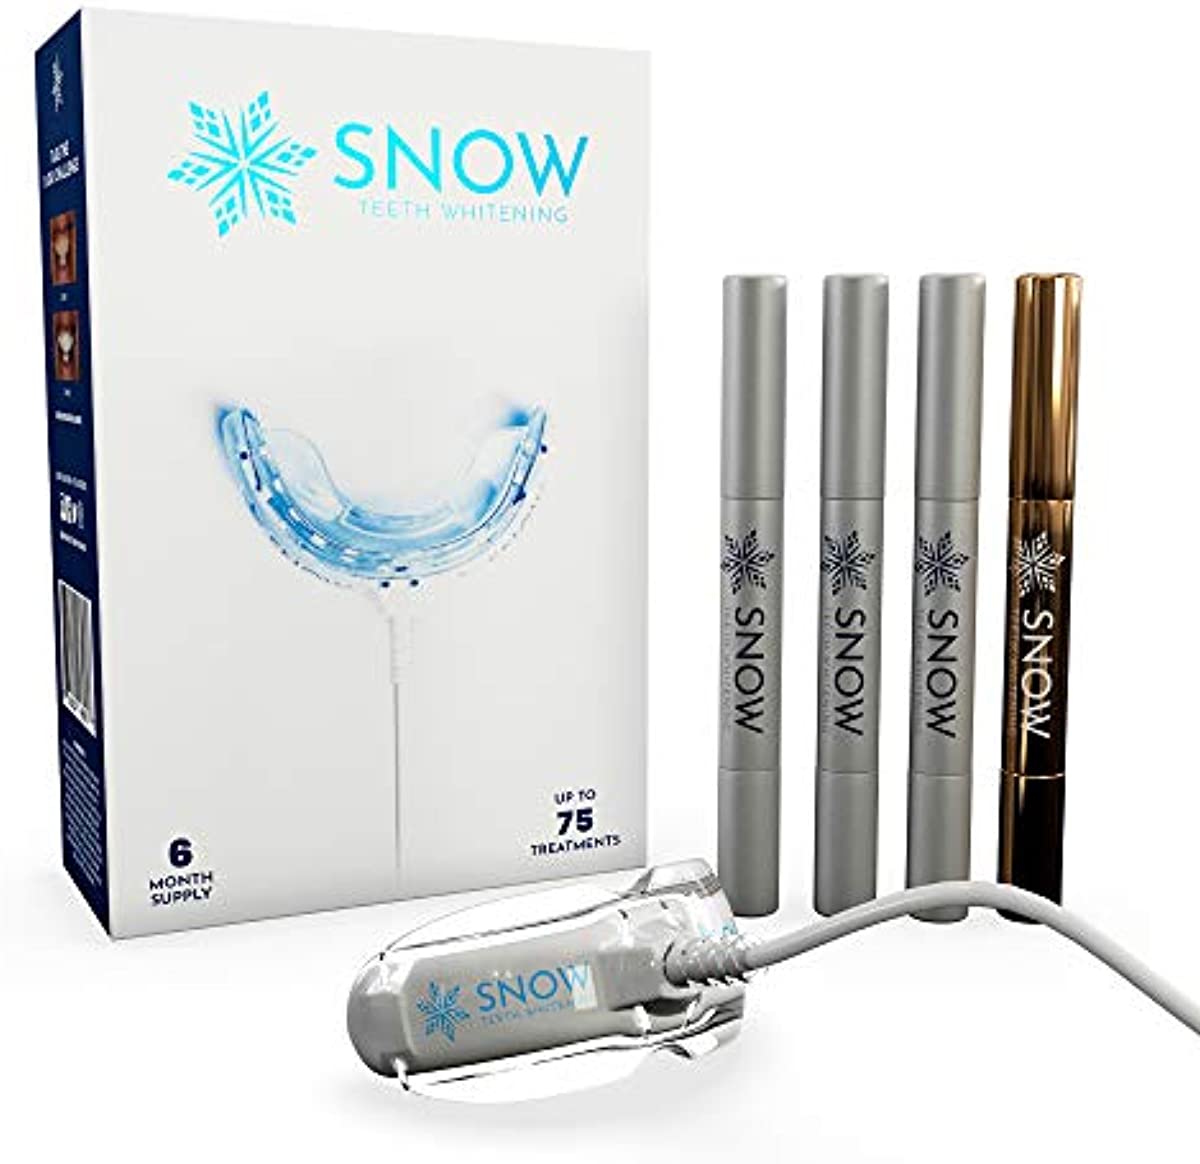 SNOW Teeth Whitening Kit with LED Light | Complete at Home Whitening System - Best Results - Safe for Sensitive Teeth, Braces, Bridges, Crowns, Caps & Veneers